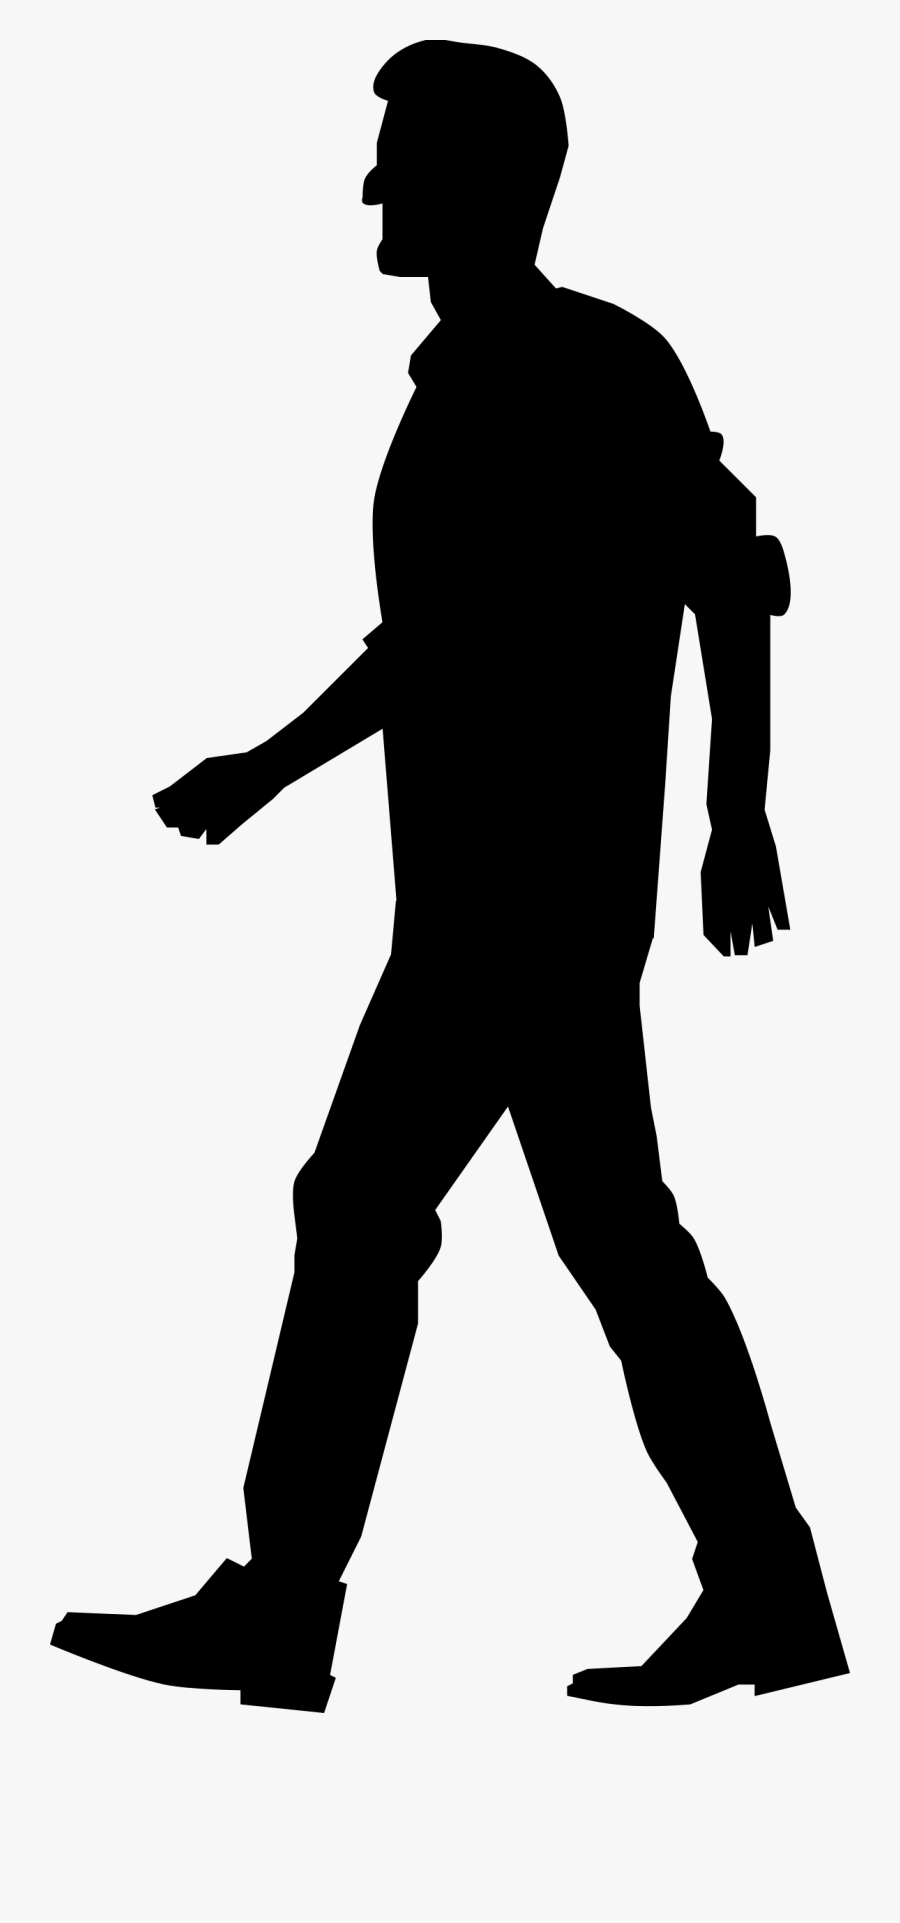 Sexy Tits Girls Pics - People Walking Silhouette Png, Transparent Clipart